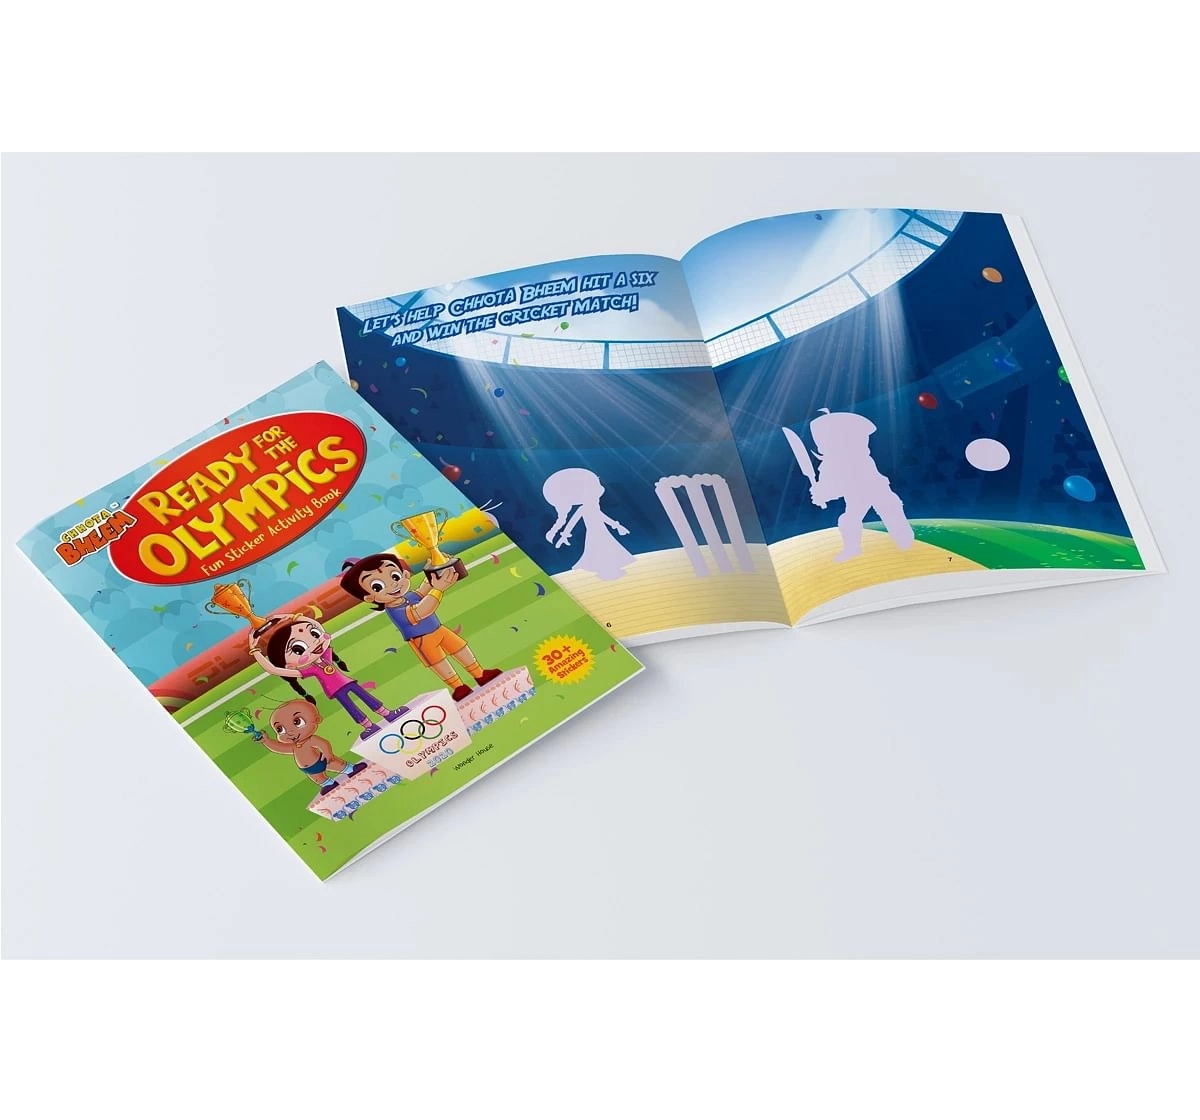 Wonder House Books Chhota Bheem Ready For the Olympics Fun Sticker Activity Book for kids 3Y+, Multicolour